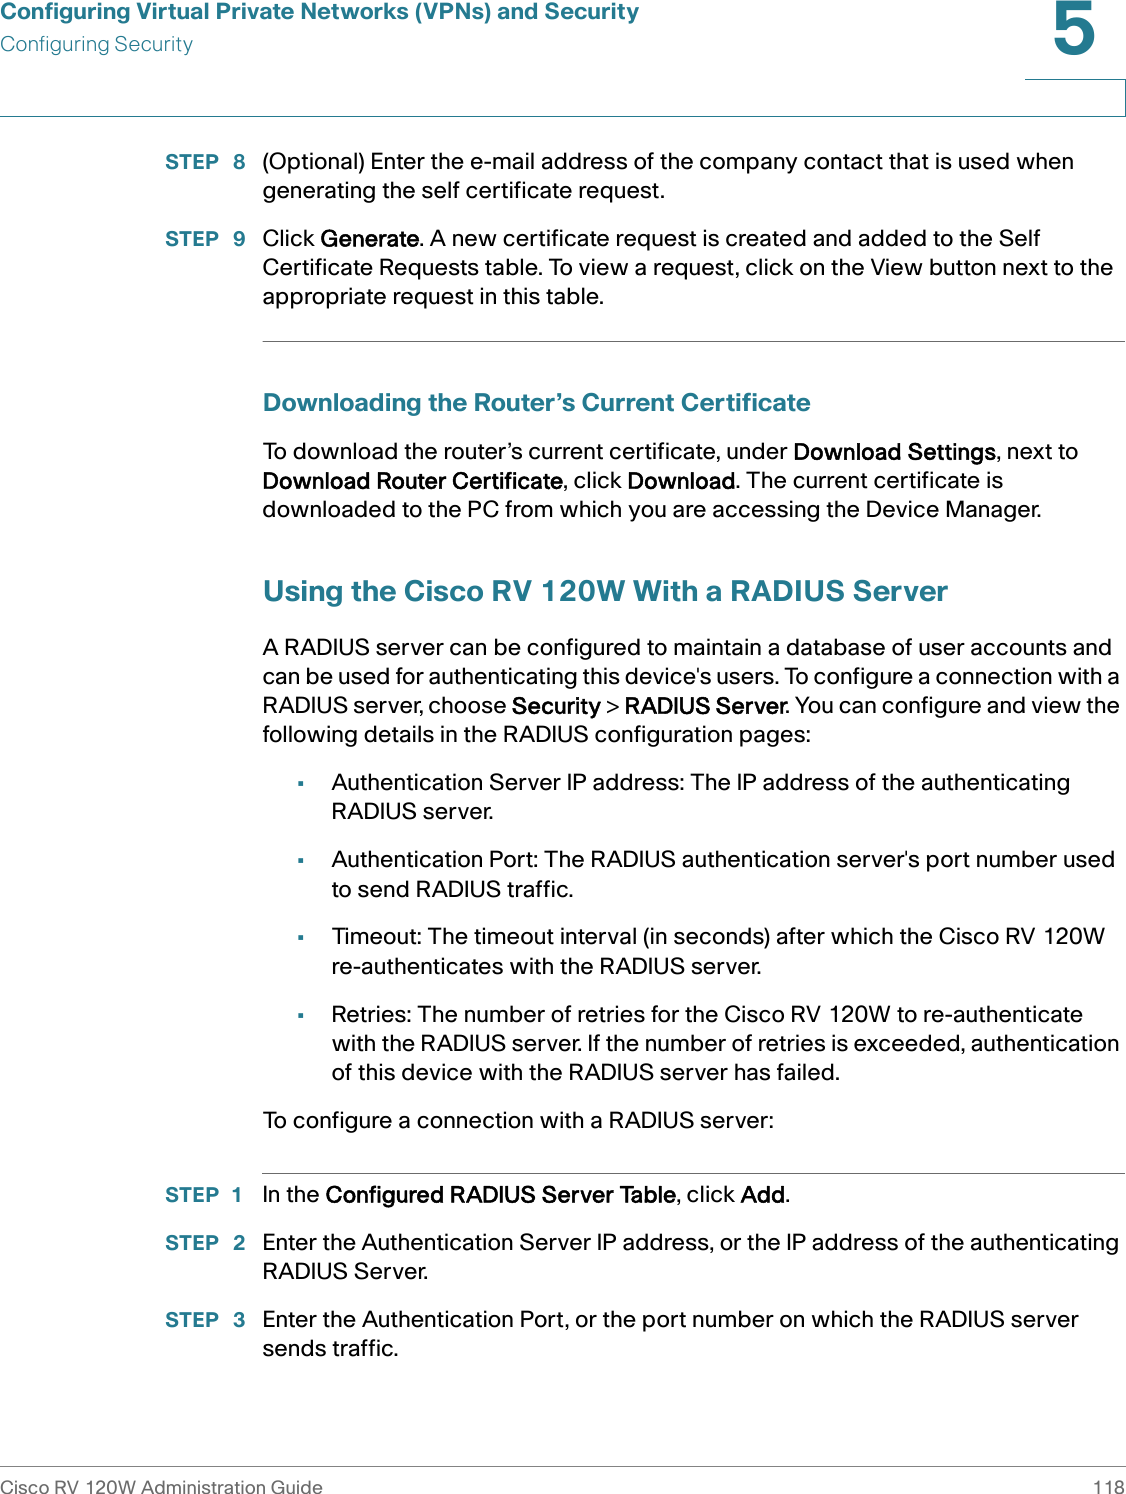 Configuring Virtual Private Networks (VPNs) and SecurityConfiguring SecurityCisco RV 120W Administration Guide 1185 STEP  8 (Optional) Enter the e-mail address of the company contact that is used when generating the self certificate request.STEP  9 Click Generate. A new certificate request is created and added to the Self Certificate Requests table. To view a request, click on the View button next to the appropriate request in this table.Downloading the Router’s Current CertificateTo download the router’s current certificate, under Download Settings, next to Download Router Certificate, click Download. The current certificate is downloaded to the PC from which you are accessing the Device Manager.Using the Cisco RV 120W With a RADIUS ServerA RADIUS server can be configured to maintain a database of user accounts and can be used for authenticating this device&apos;s users. To configure a connection with a RADIUS server, choose Security &gt; RADIUS Server. You can configure and view the following details in the RADIUS configuration pages:•Authentication Server IP address: The IP address of the authenticating RADIUS server.•Authentication Port: The RADIUS authentication server&apos;s port number used to send RADIUS traffic.•Timeout: The timeout interval (in seconds) after which the Cisco RV 120W re-authenticates with the RADIUS server. •Retries: The number of retries for the Cisco RV 120W to re-authenticate with the RADIUS server. If the number of retries is exceeded, authentication of this device with the RADIUS server has failed.To configure a connection with a RADIUS server:STEP 1 In the Configured RADIUS Server Table, click Add.STEP  2 Enter the Authentication Server IP address, or the IP address of the authenticating RADIUS Server.STEP  3 Enter the Authentication Port, or the port number on which the RADIUS server sends traffic.